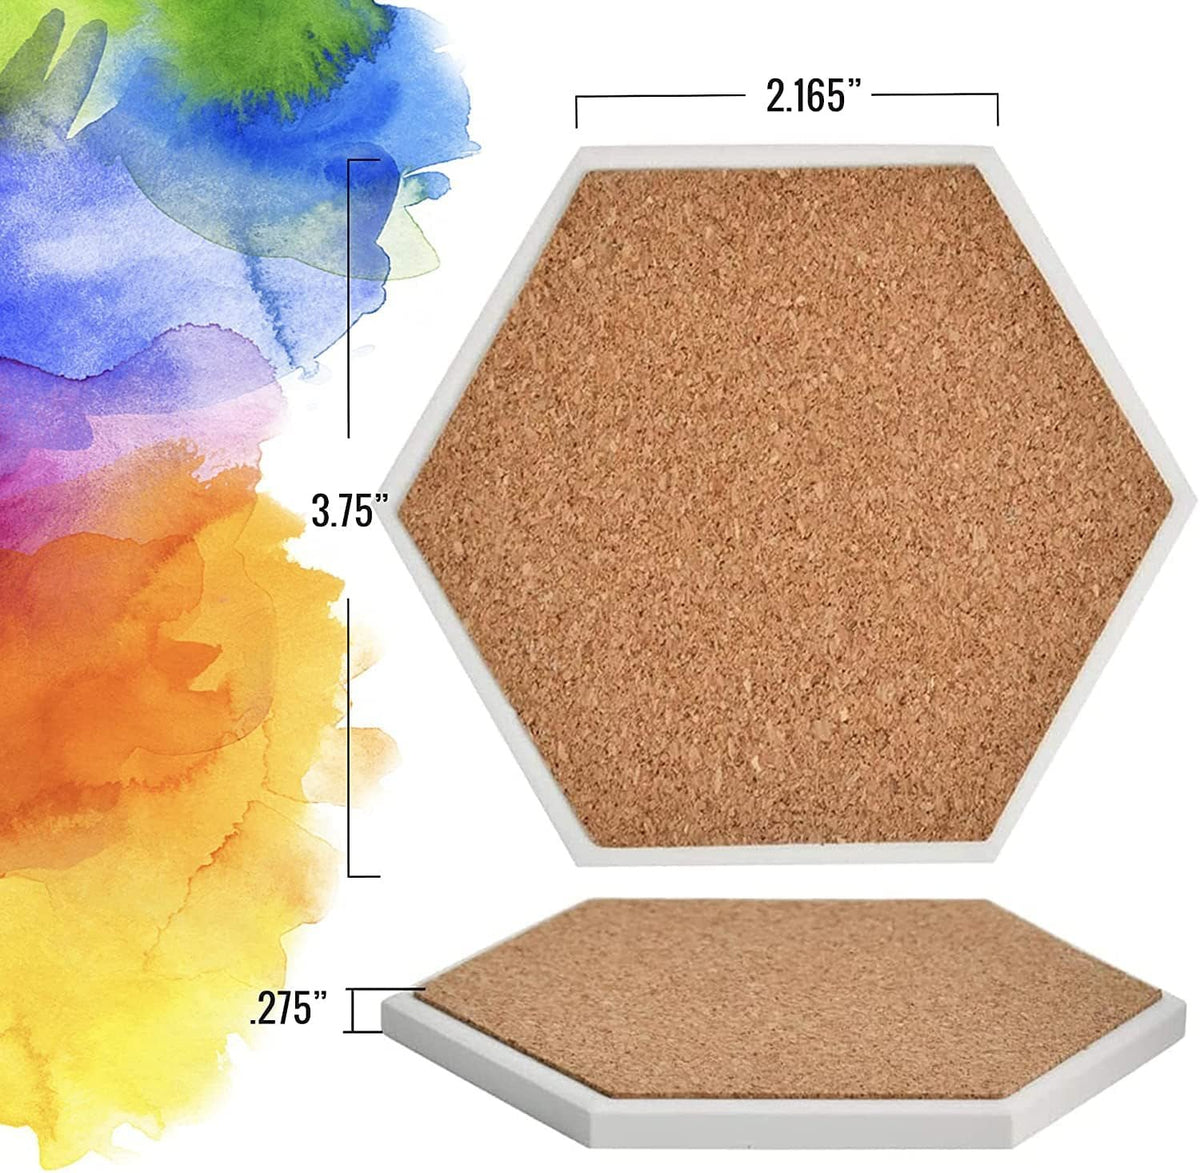 Creative Hobbies Ceramic Tiles for Crafts and Coasters - 4 Square Tiles  with Cork Backers